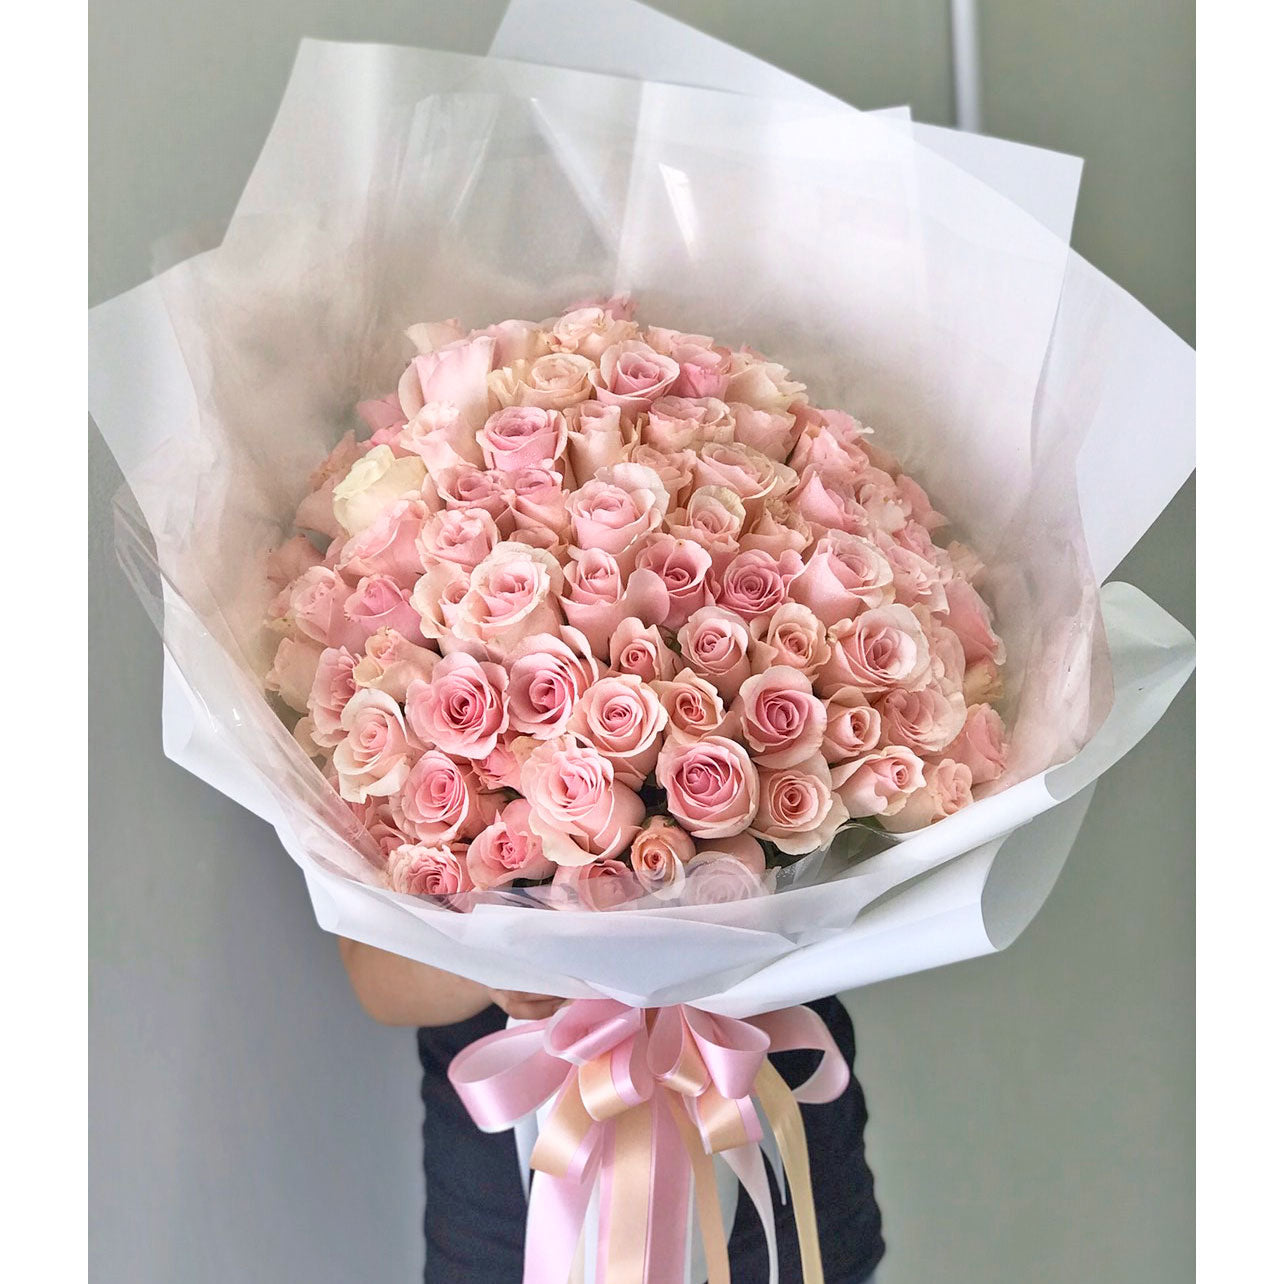 "Sweet Bella" One Hundred Romantic Pink Roses Bouquet